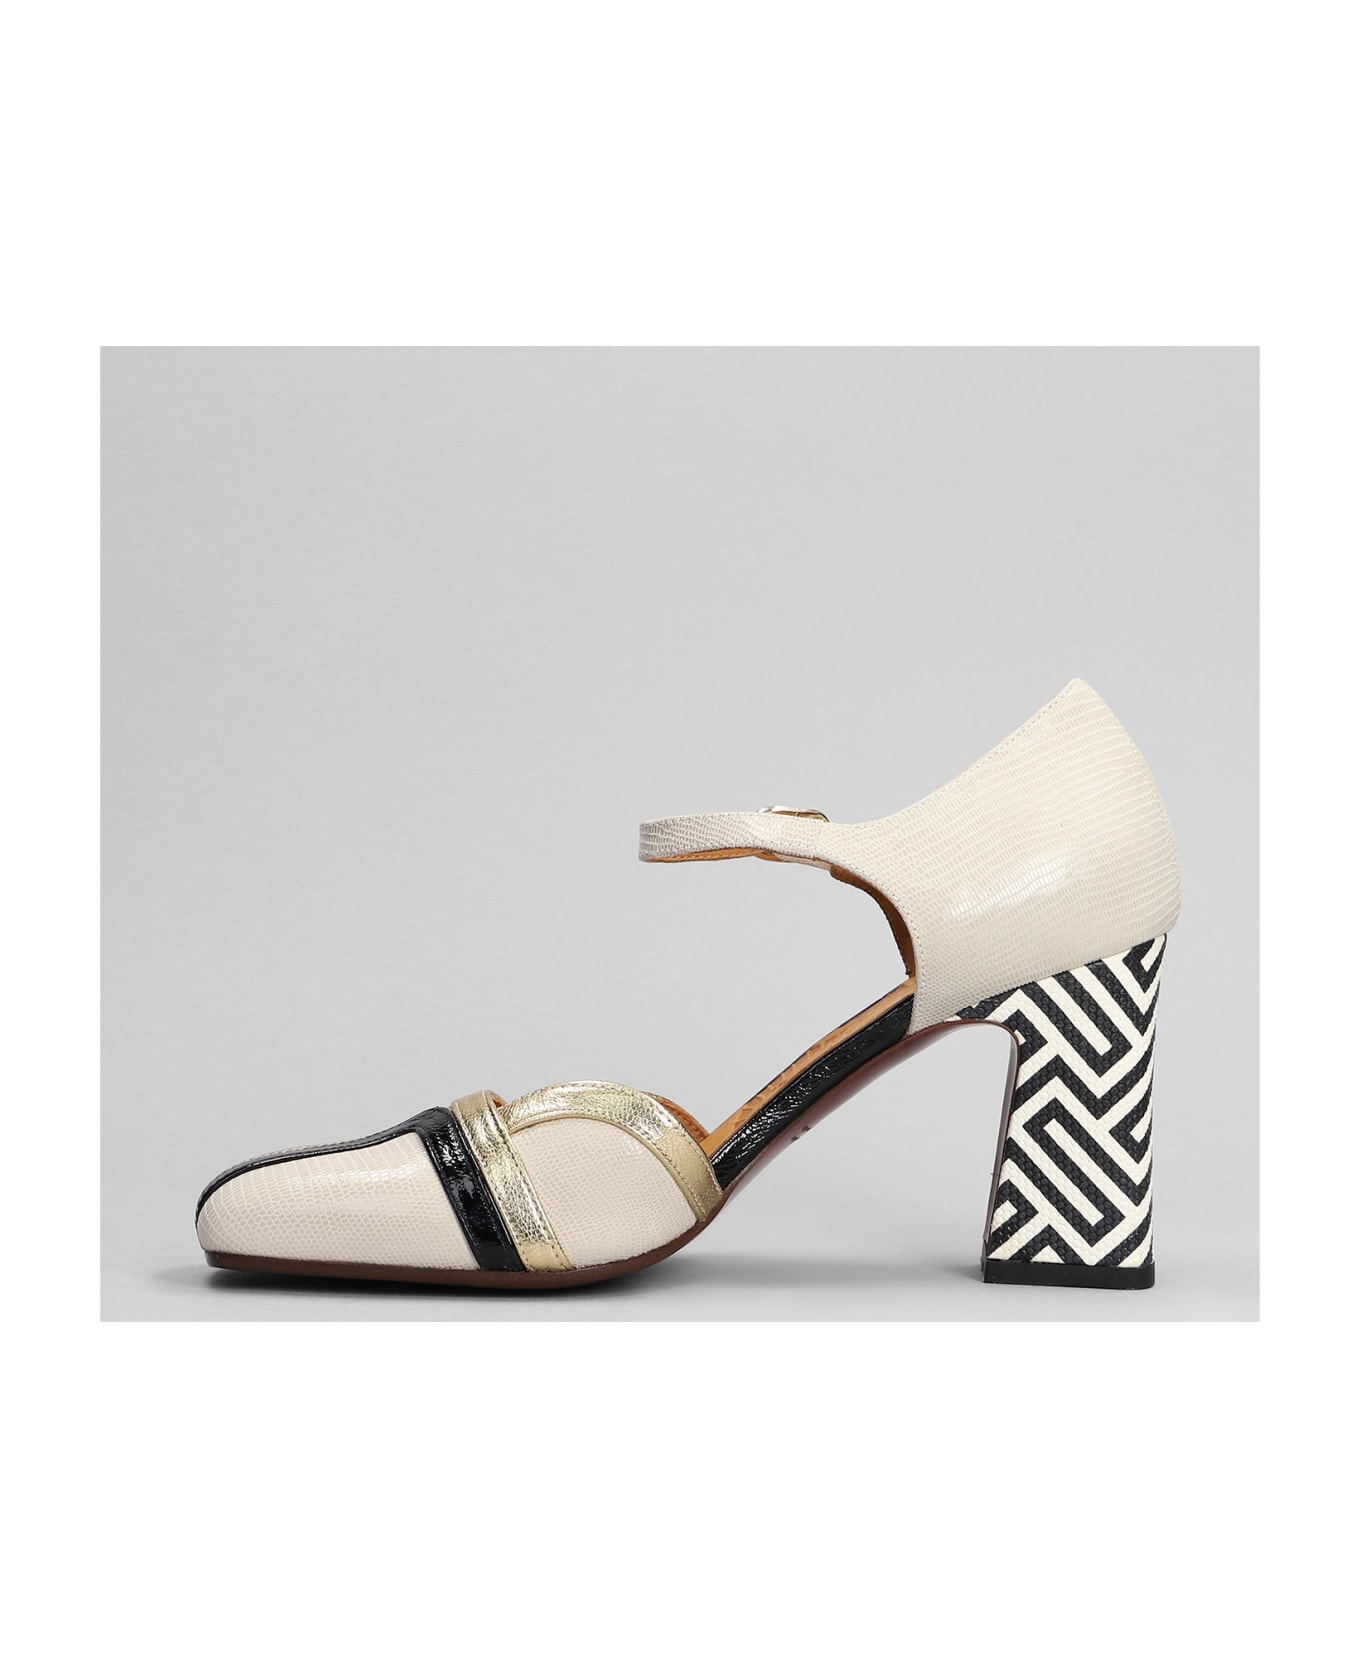 Chie Mihara Olali Pumps In Beige Leather - beige